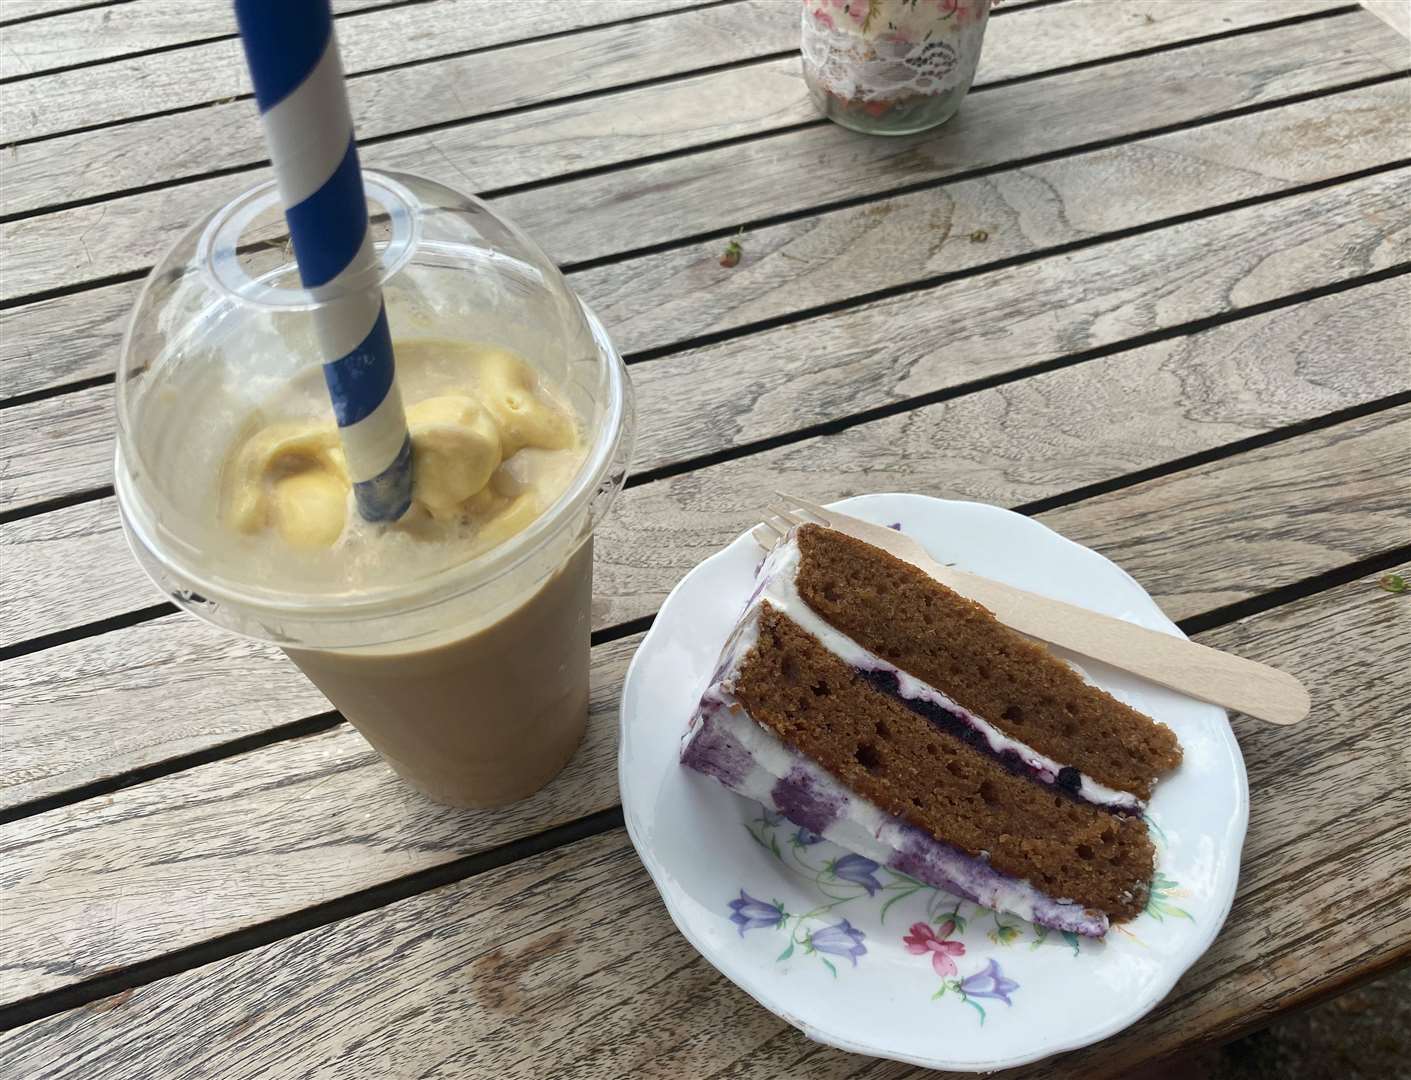 The Fandango Ice-Cream Iced Coffee was £6.20 and the Banana and Blueberry Layer Cake was £3.20